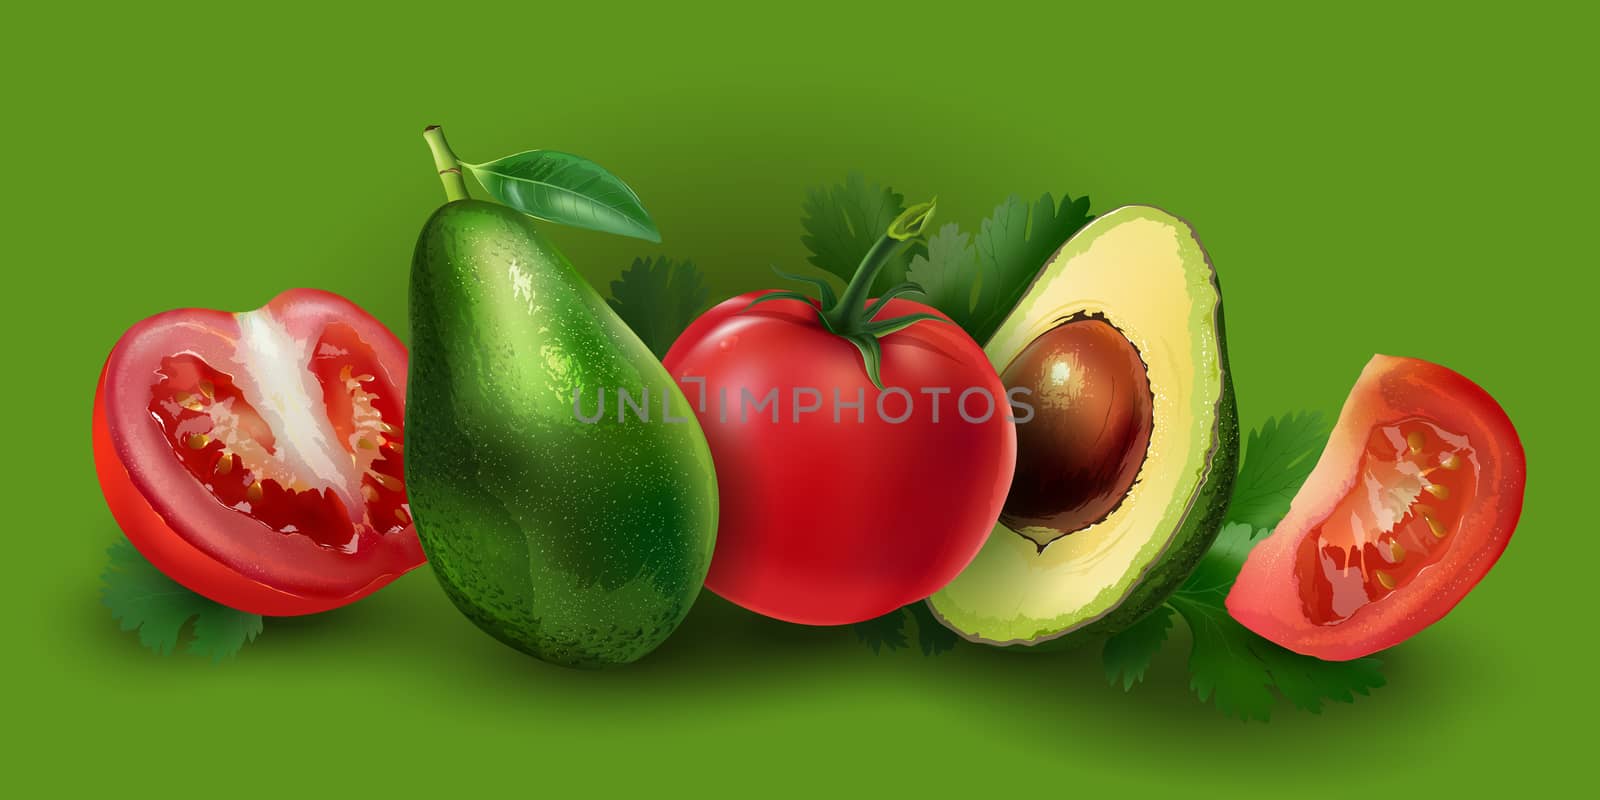 Avocado and tomato slices on a green background.